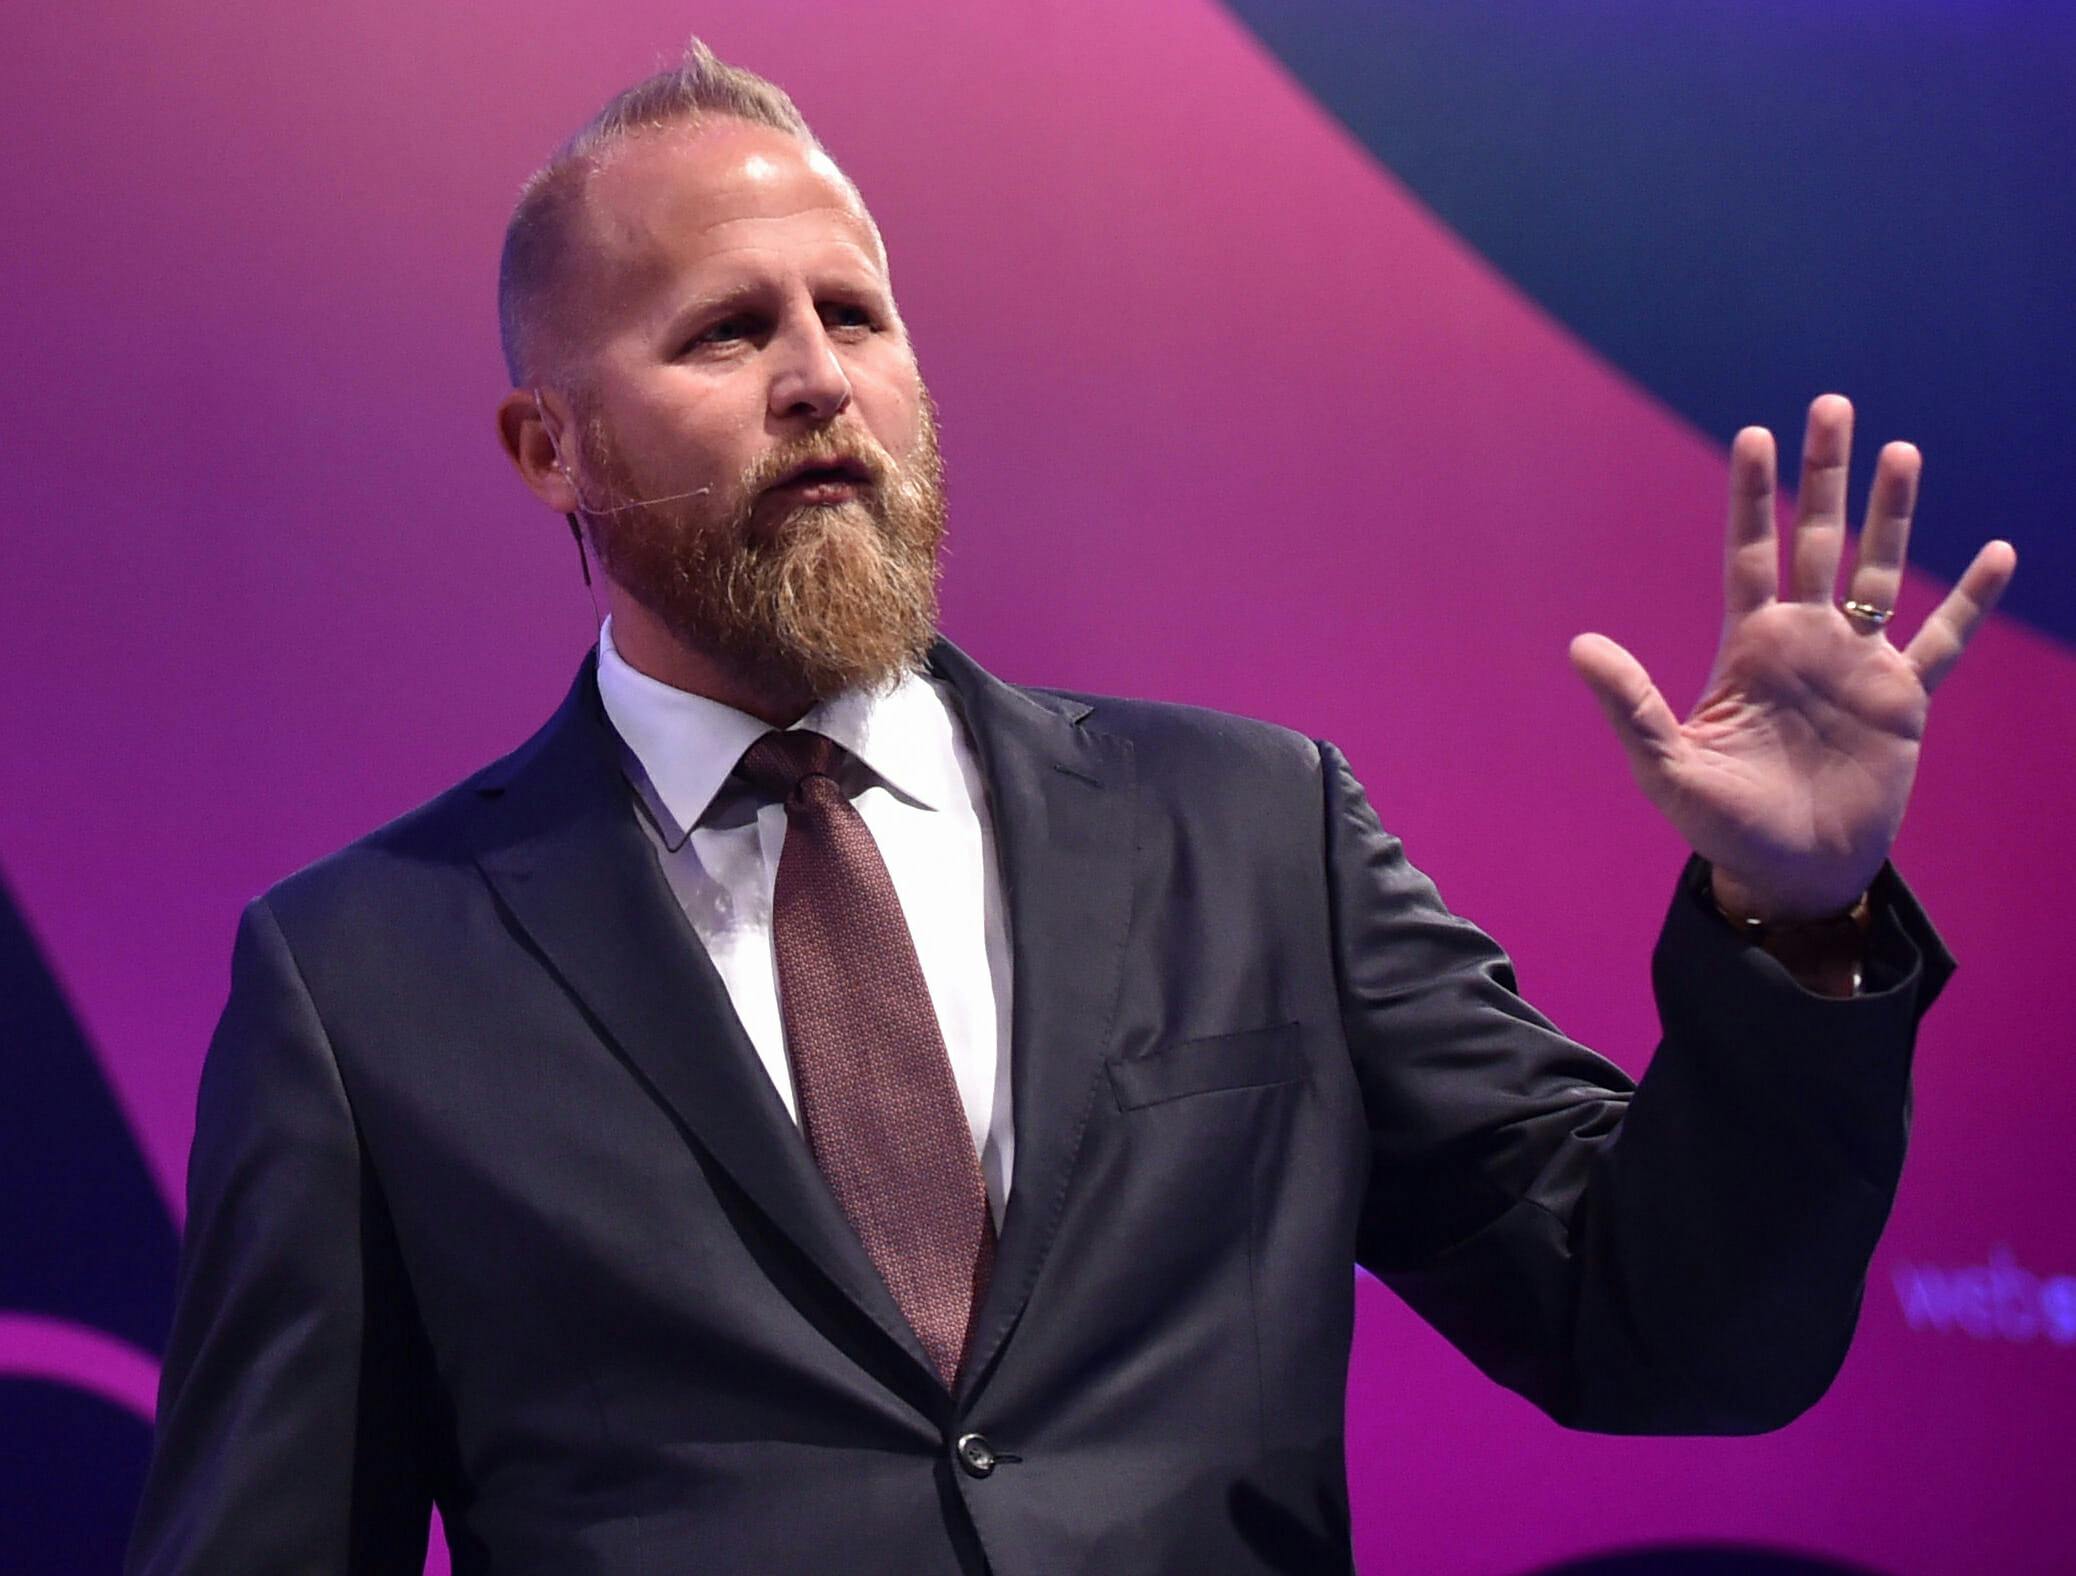 who is Brad Parscale